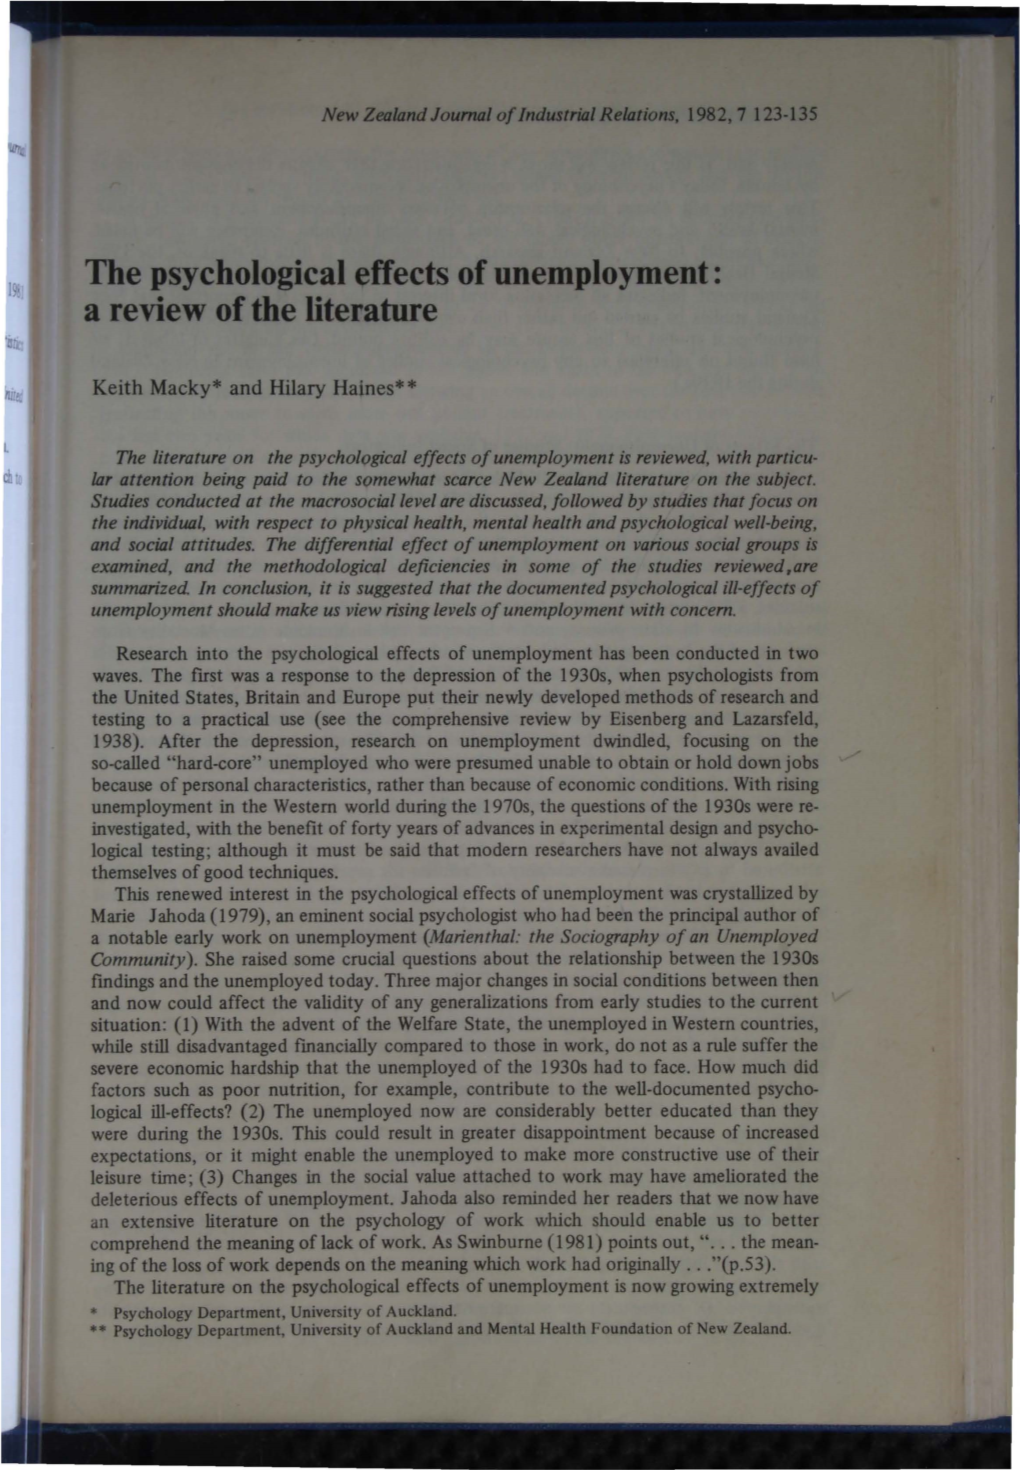 The Psychological Effects of Unemployment: a Review of the Literature